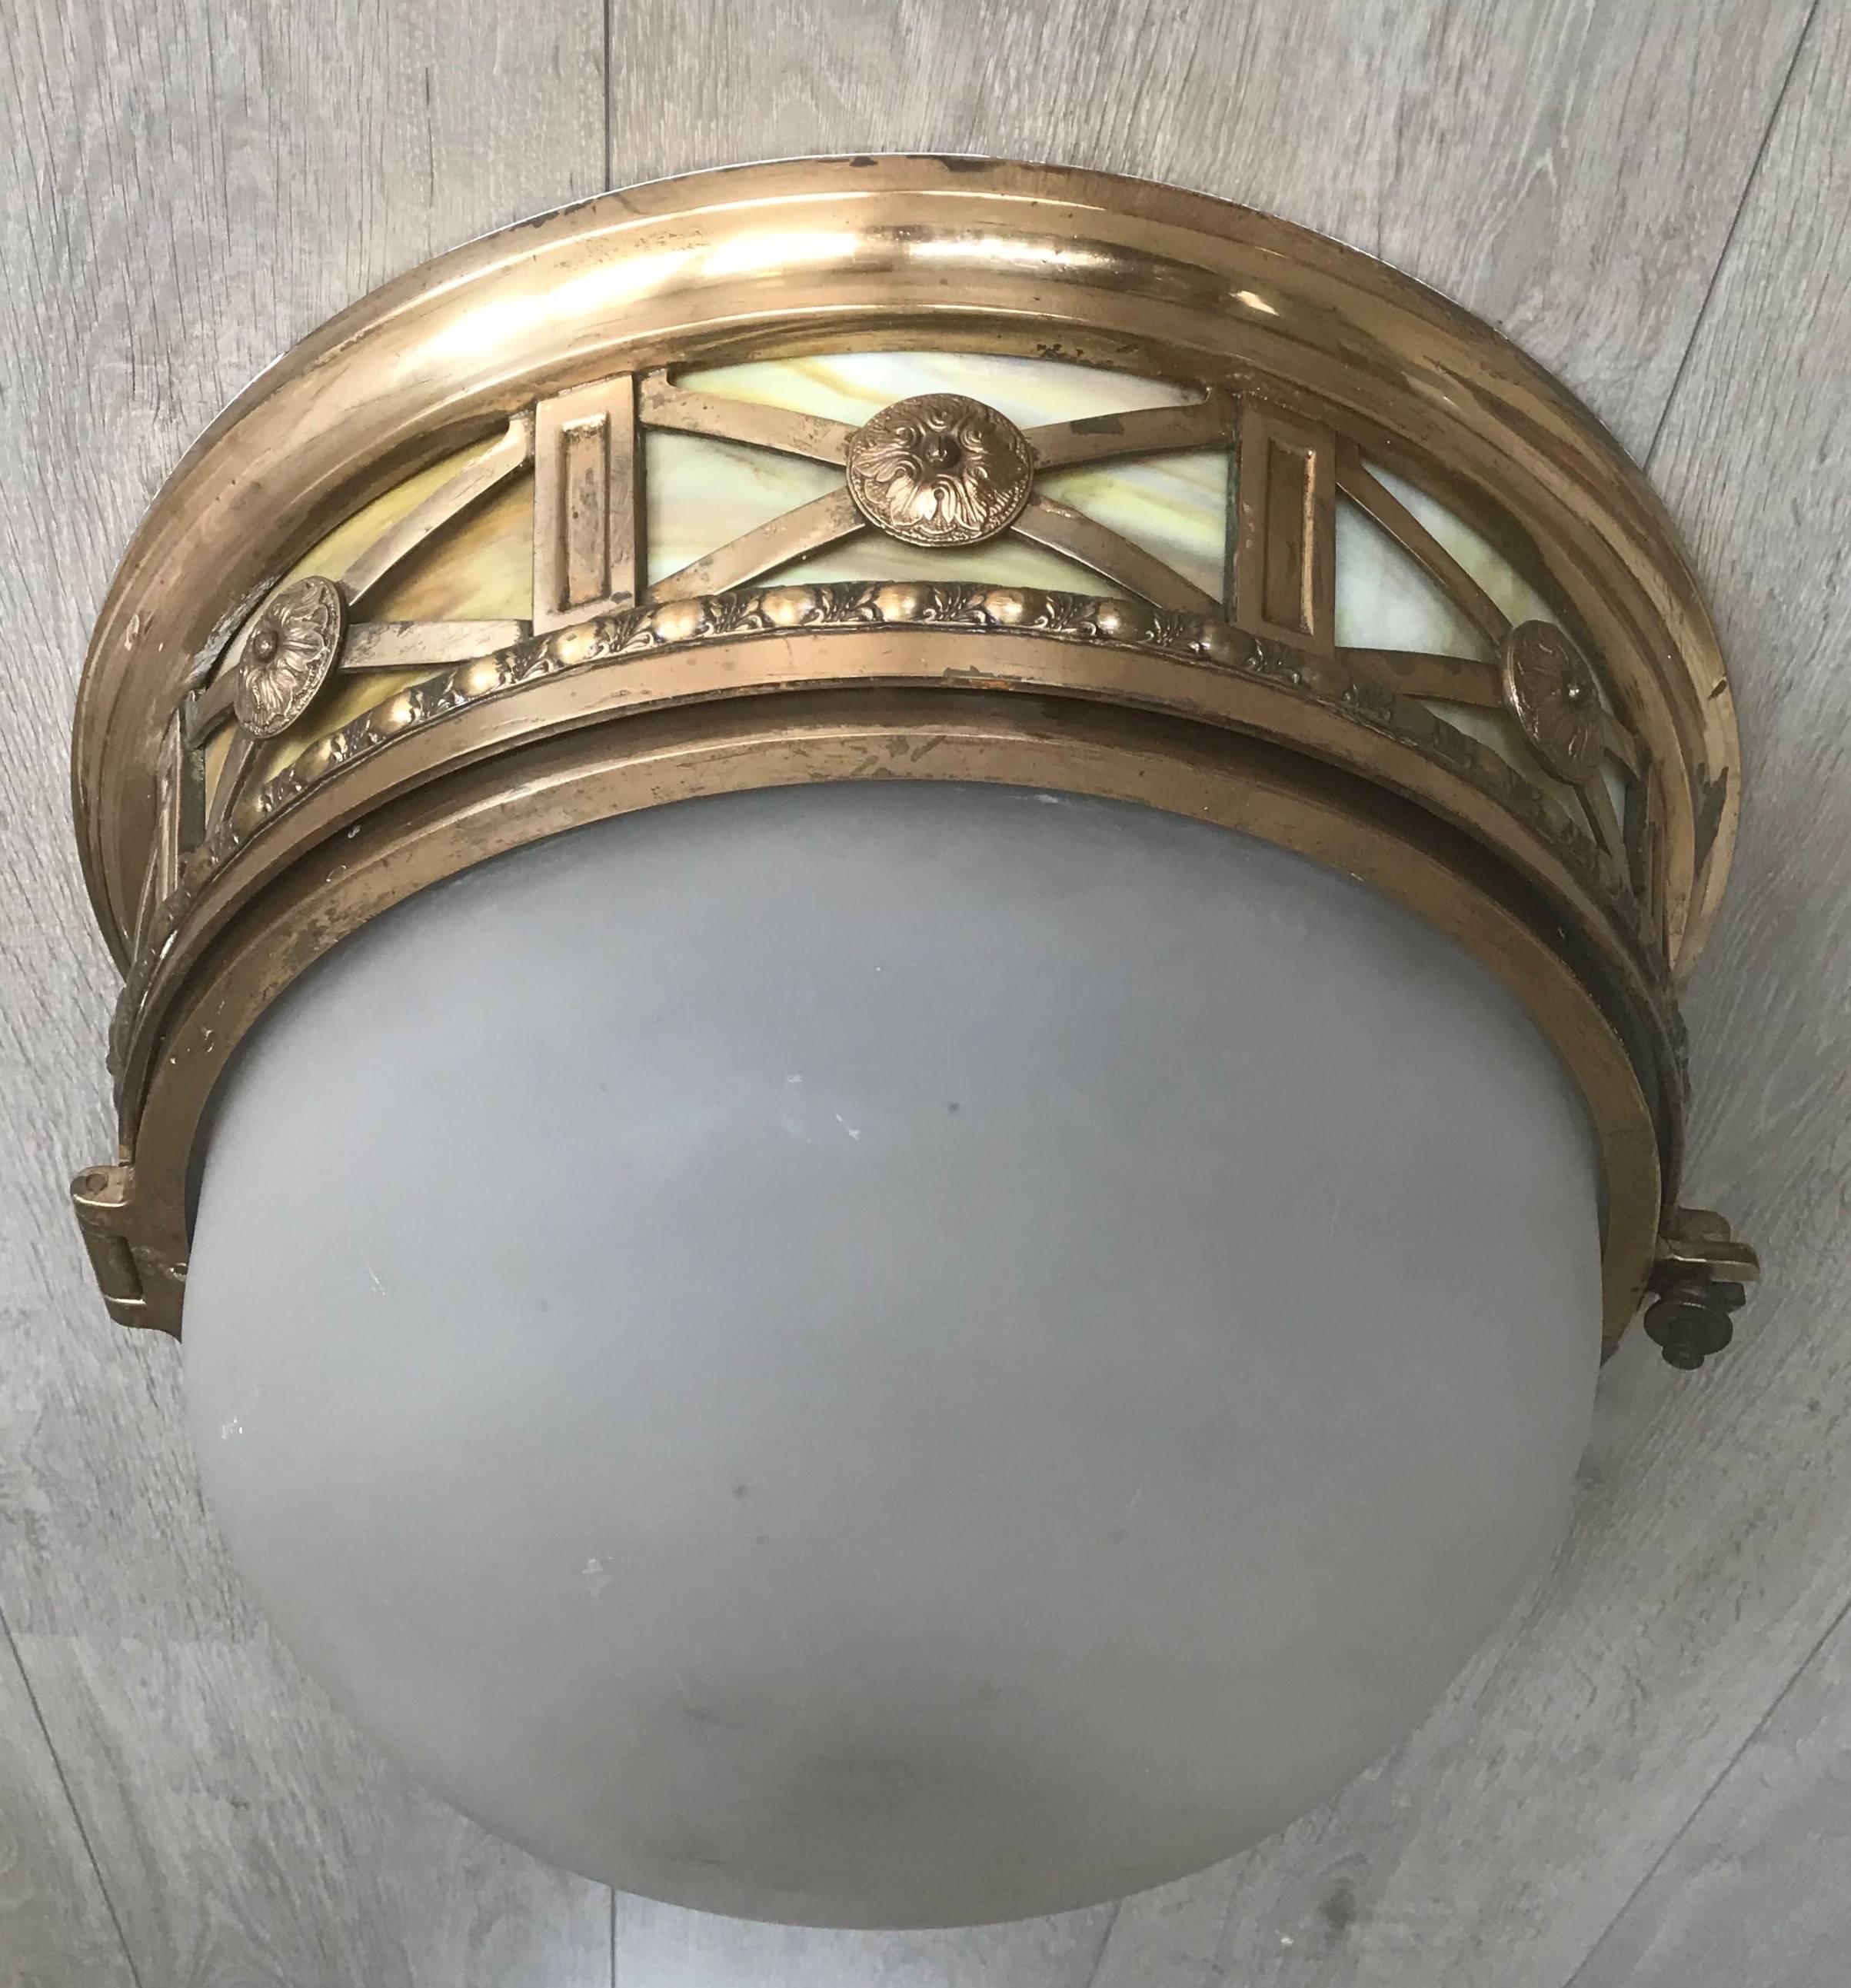 Rare Art Nouveau era three-light flush mount.

This out of the ordinary, French antique flush mount is beautiful in shape and decorated with fine bronze ornaments and two types of glass. This upside down dome shape flush mount of rich materials has